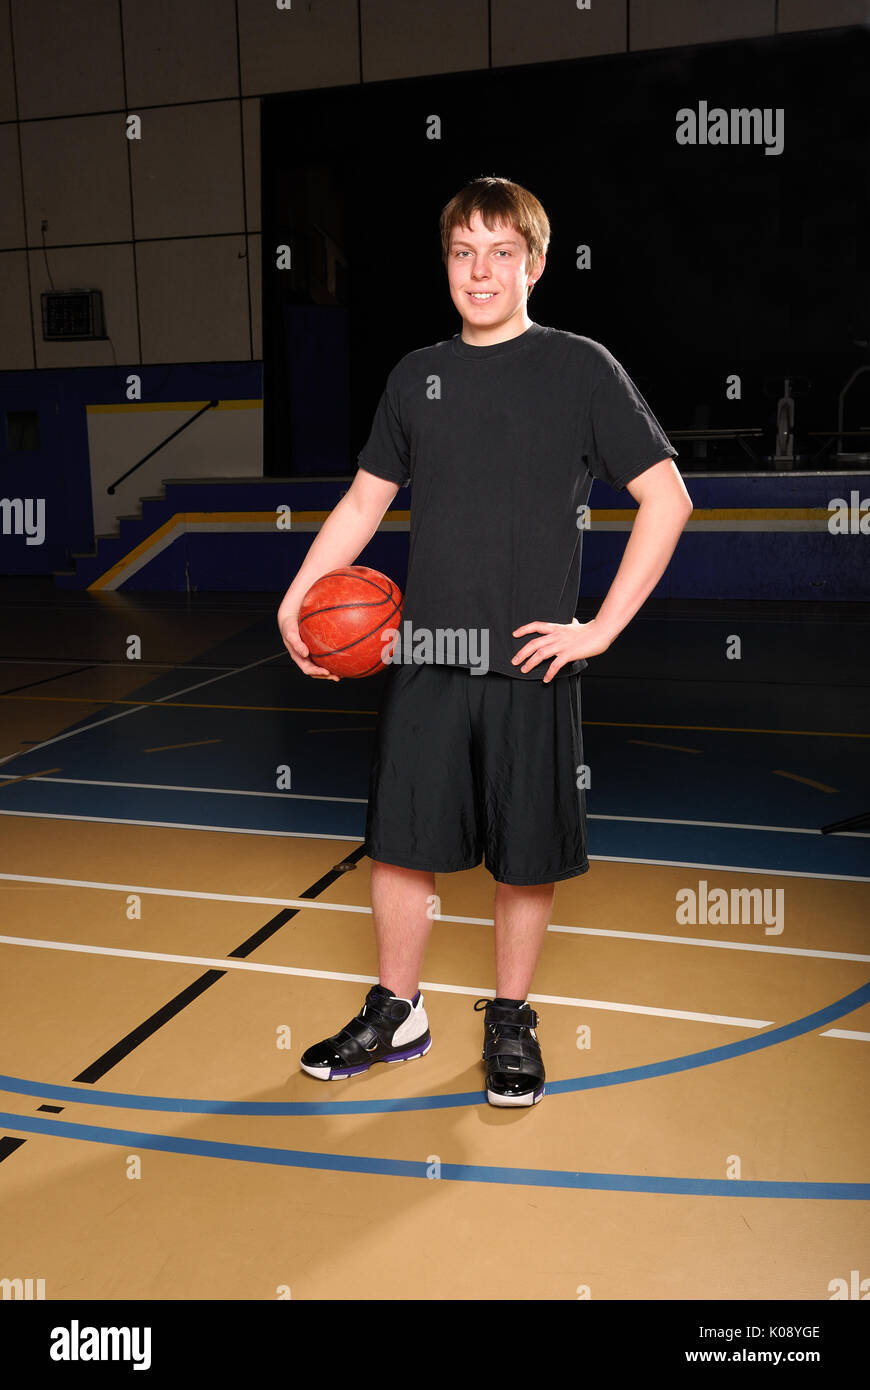 Portrait of a Teenage Basketball Player in Gym Stock Photo